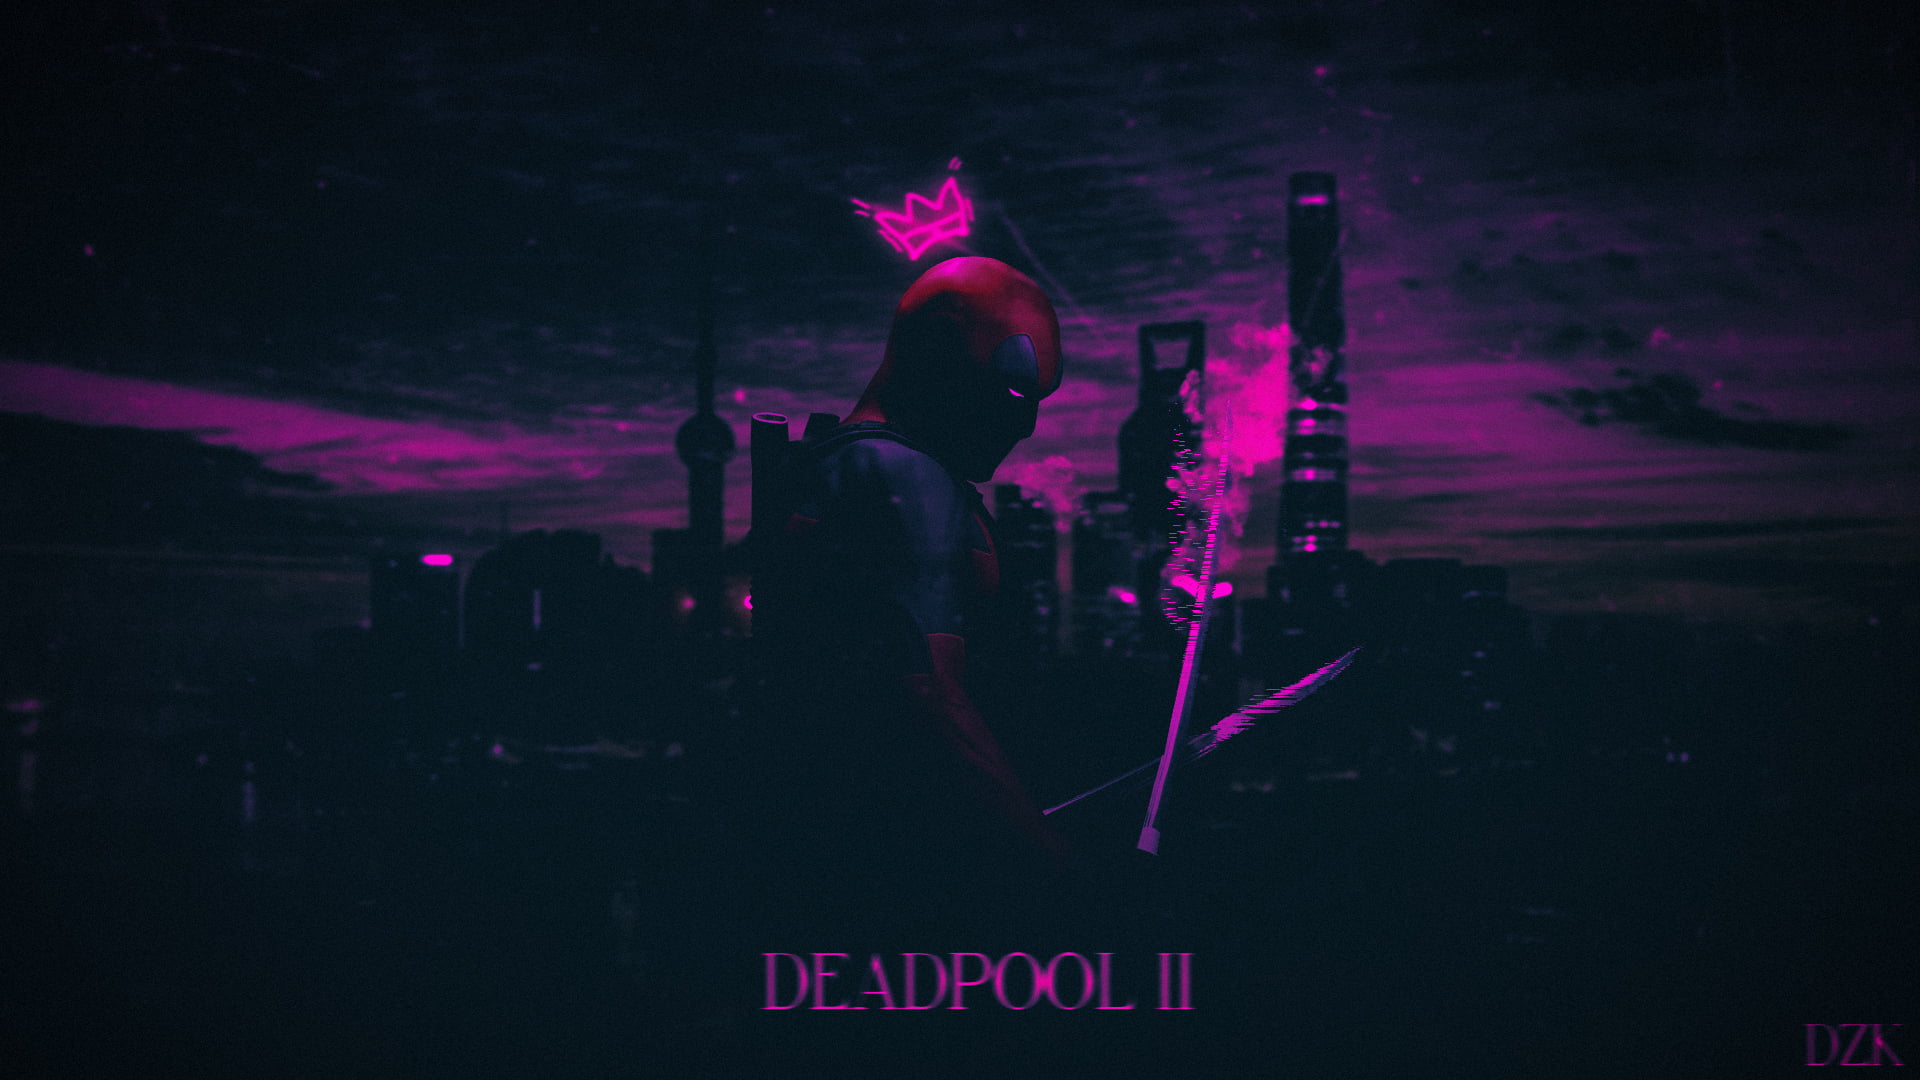 Deadpool 2 wallpaper, Merc with a mouth, Photoshop, colorful, cityscape